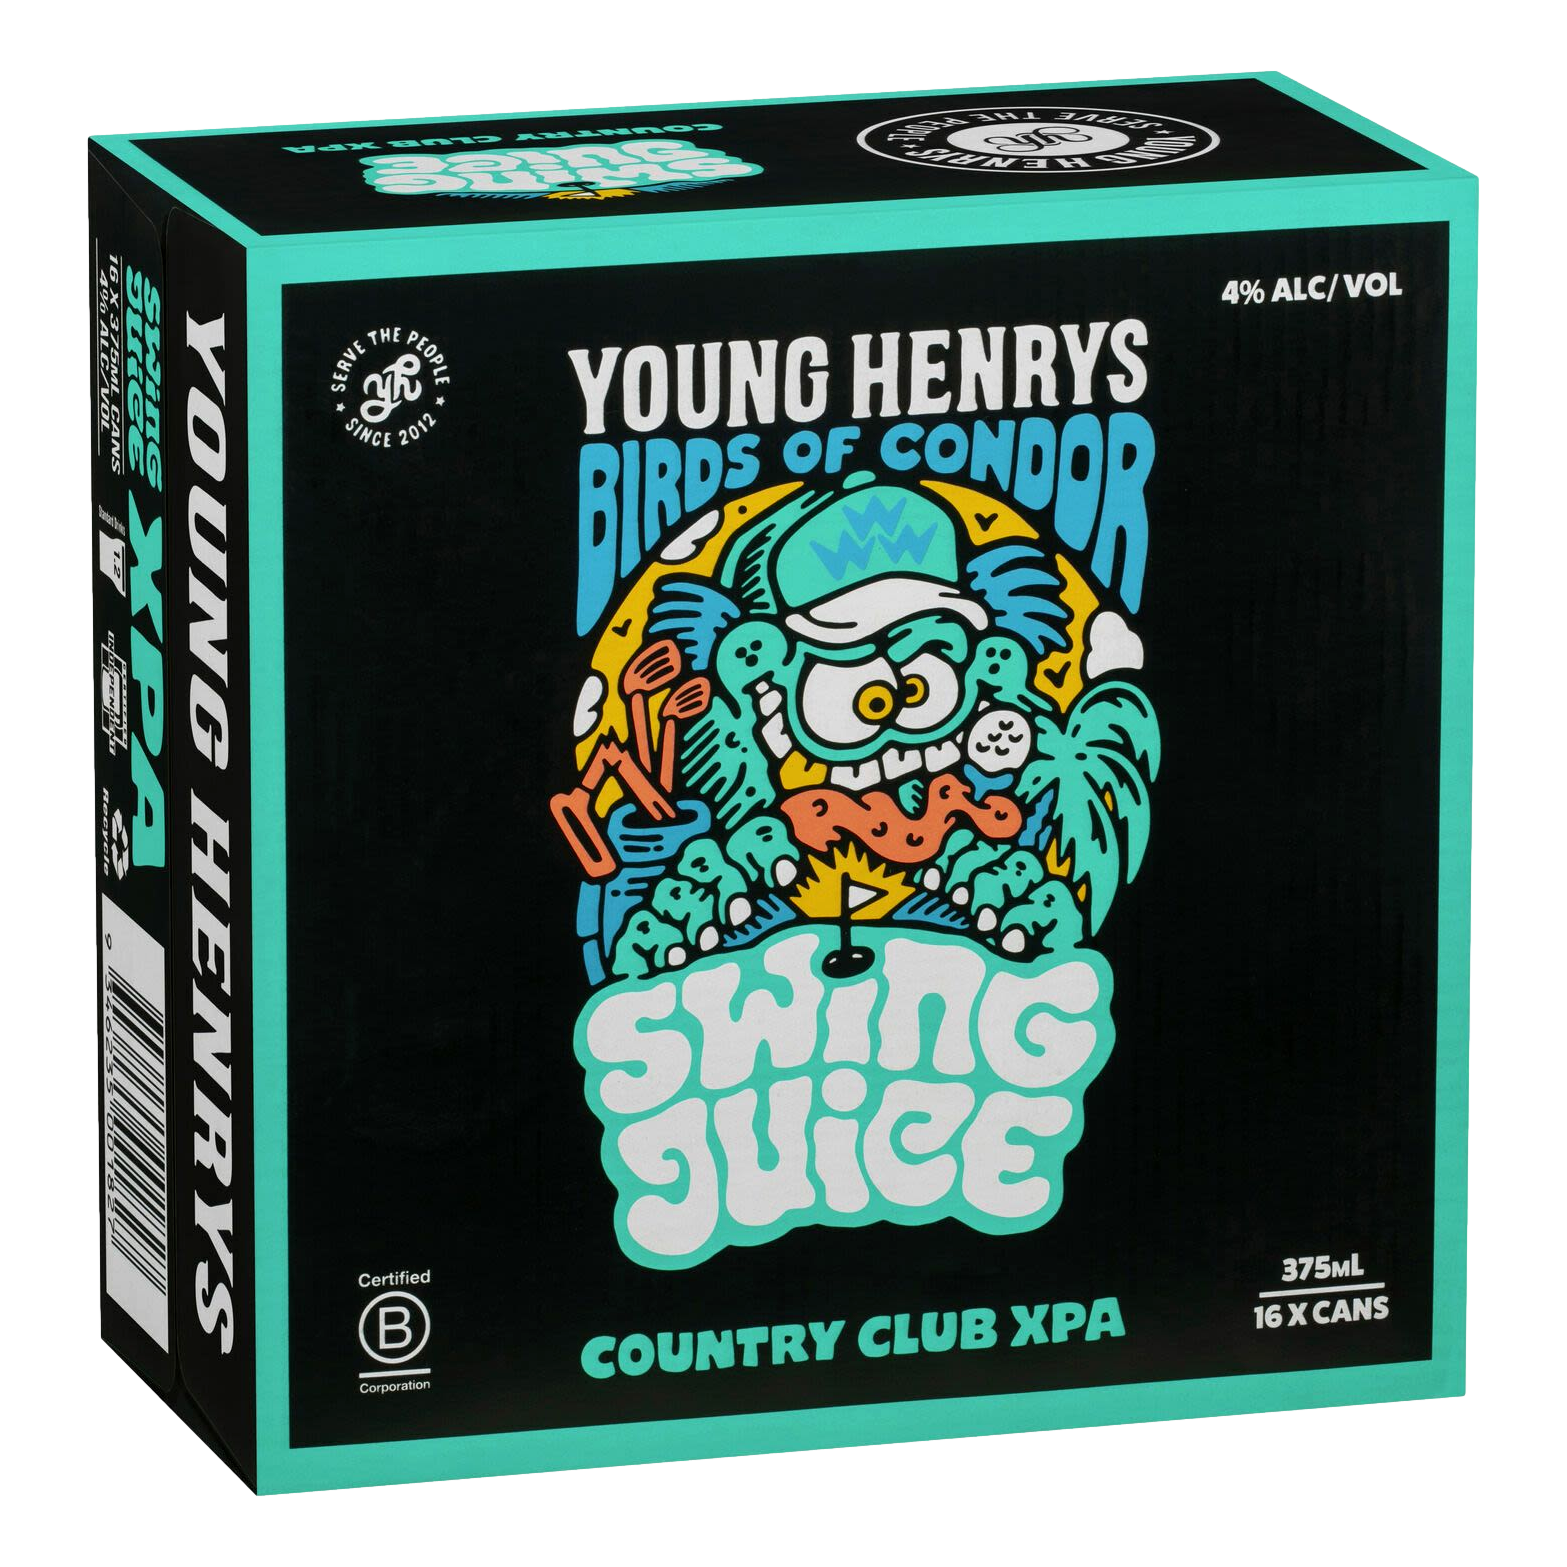 Young Henrys Swing Juice Country Club XPA 375ml Can Case of 16